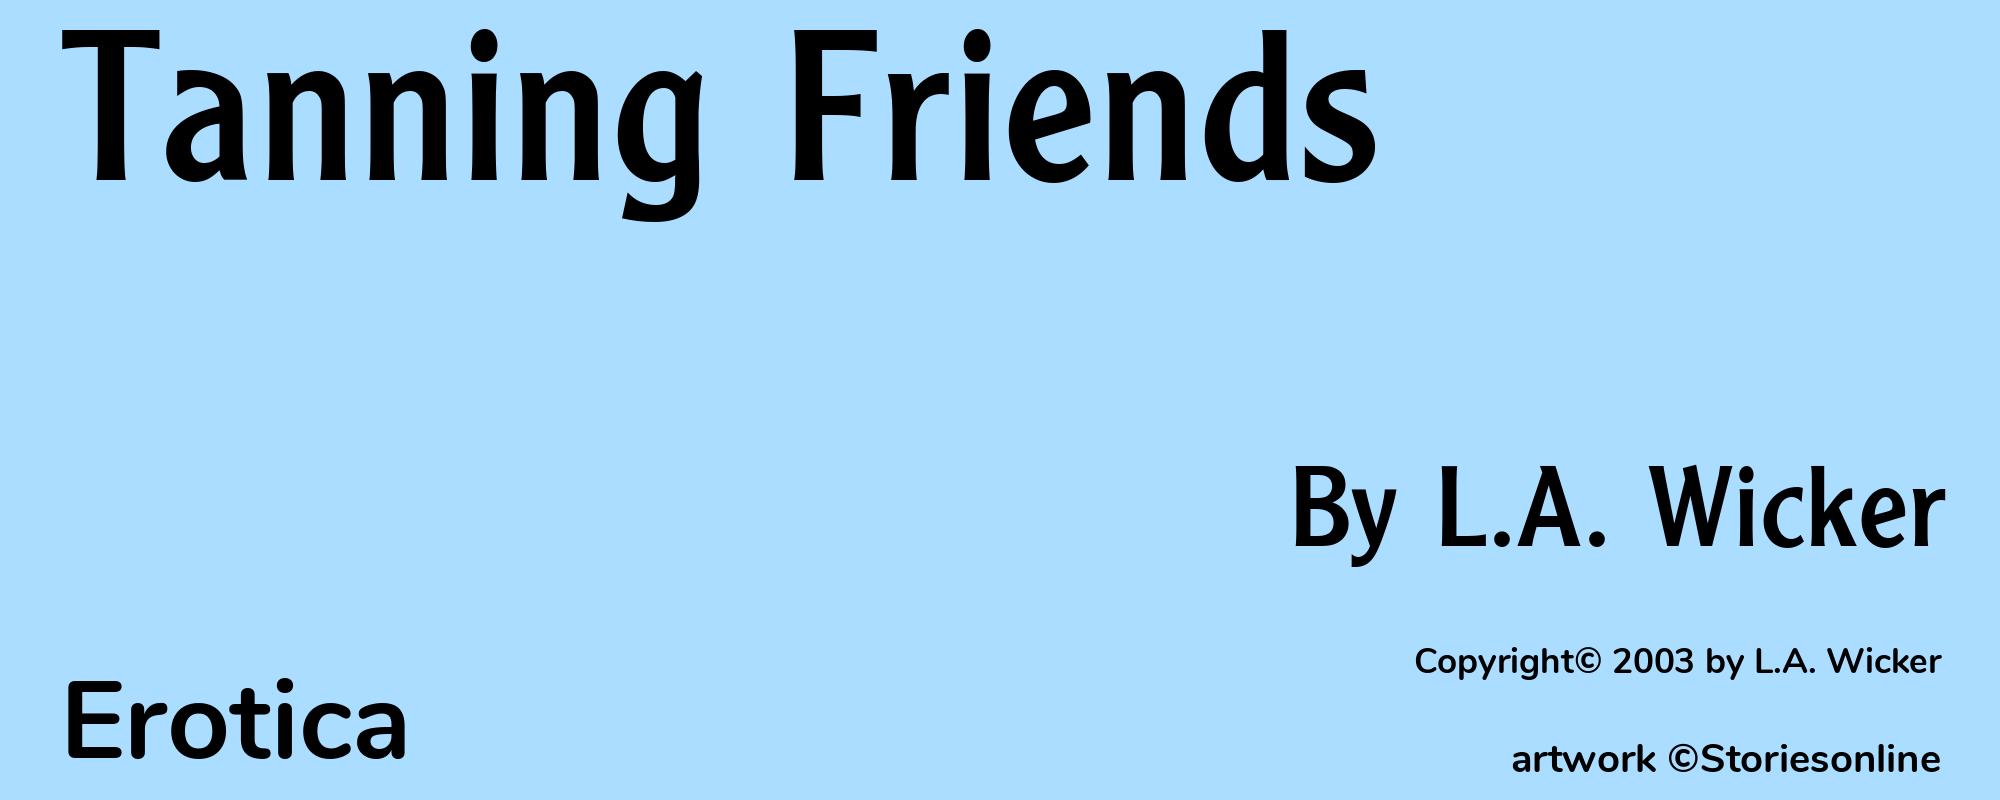 Tanning Friends - Cover